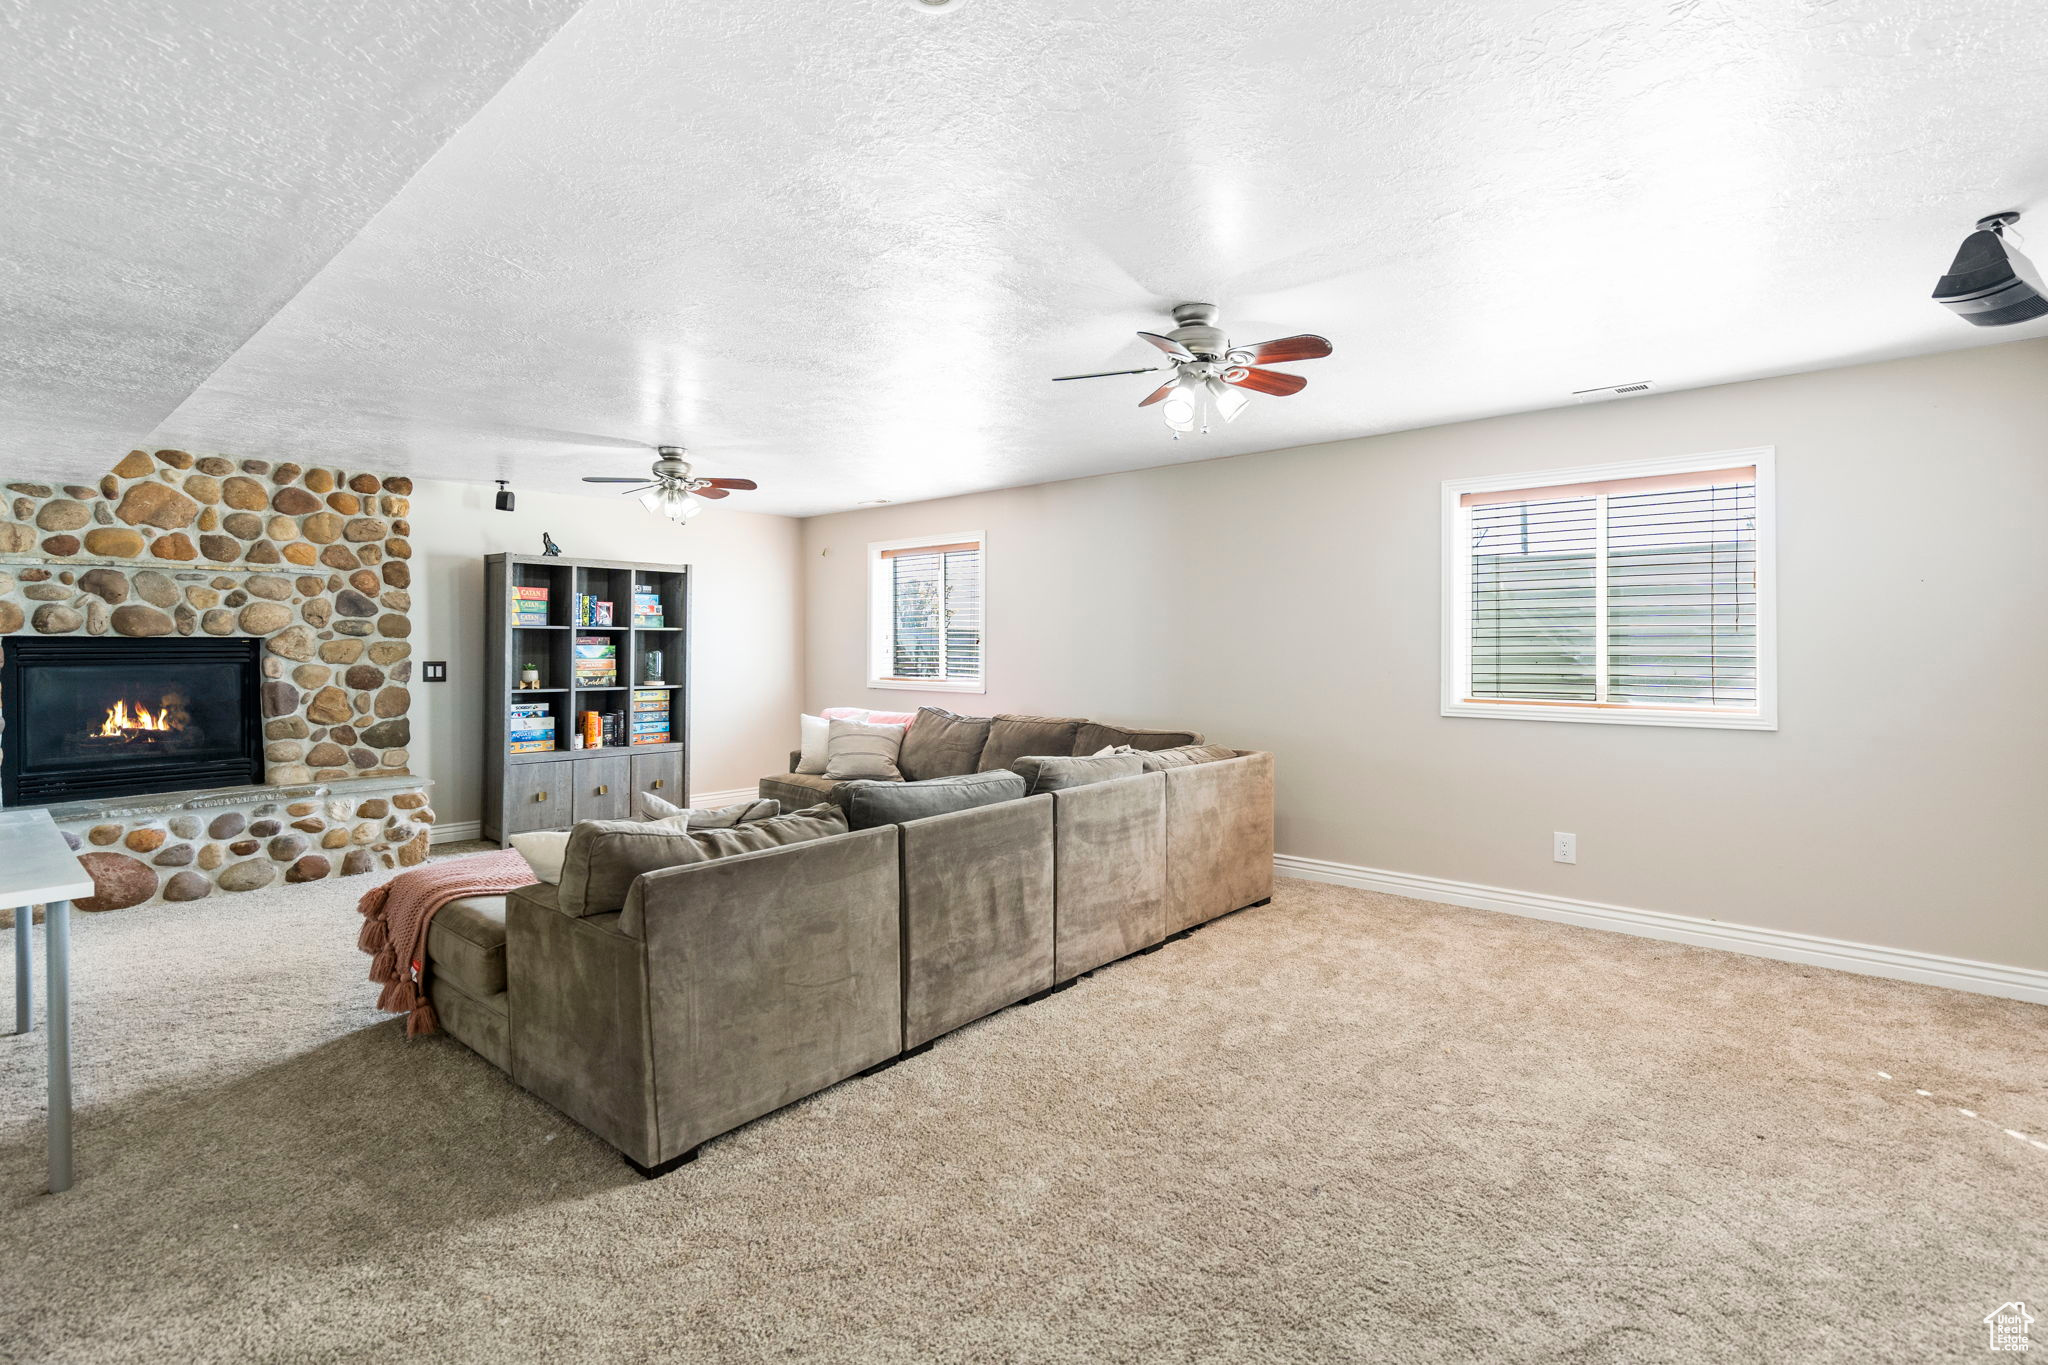 Living room with carpet, ceiling fan, a textured ceiling, and a fireplace